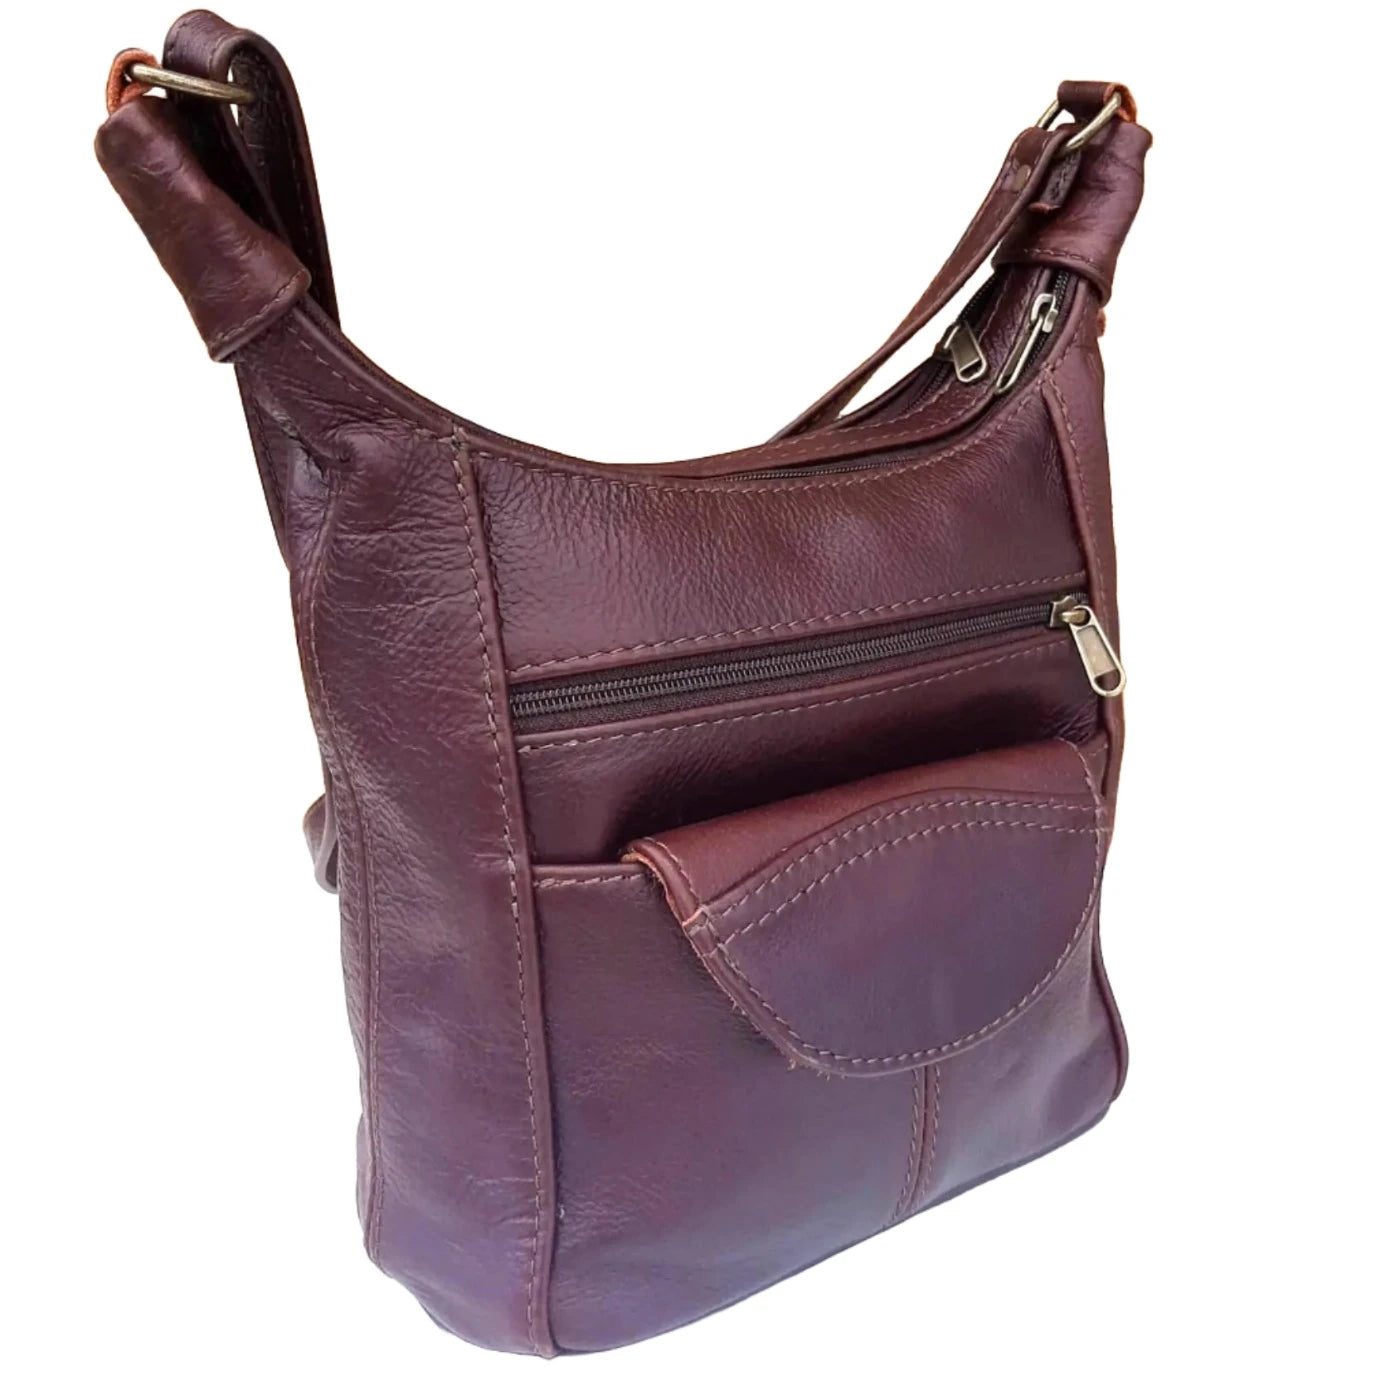 SH medium leather bags in dark tan colour from Cape Masai Leather